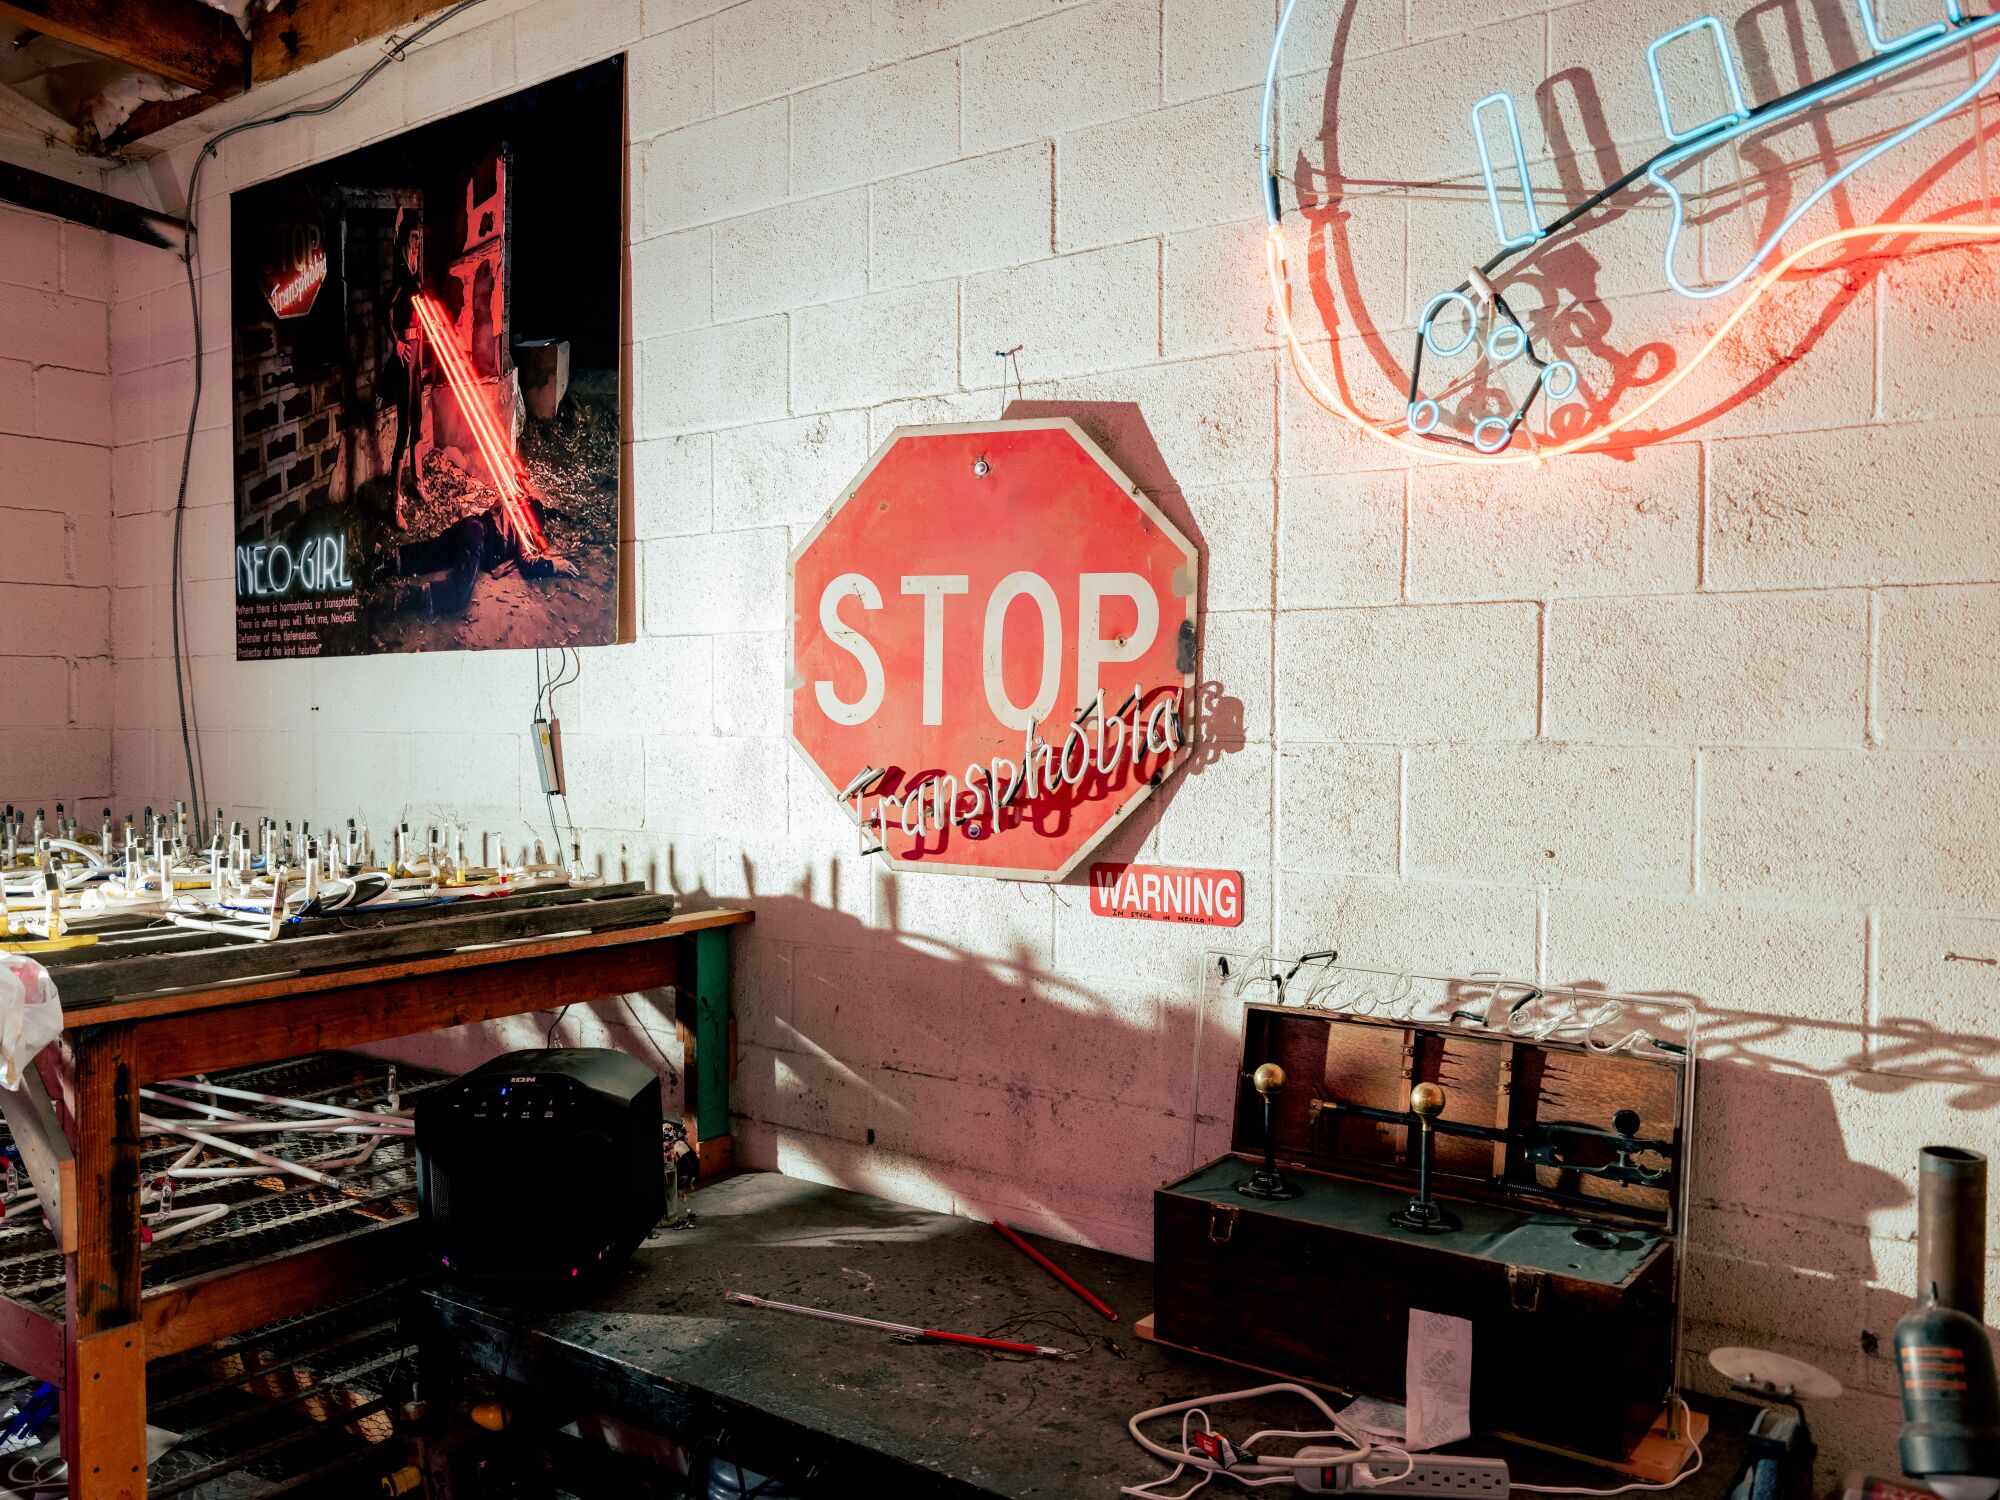 A neon art piece by Roxy Rose, reading "Stop Transphobia," hangs on the wall of her workshop.